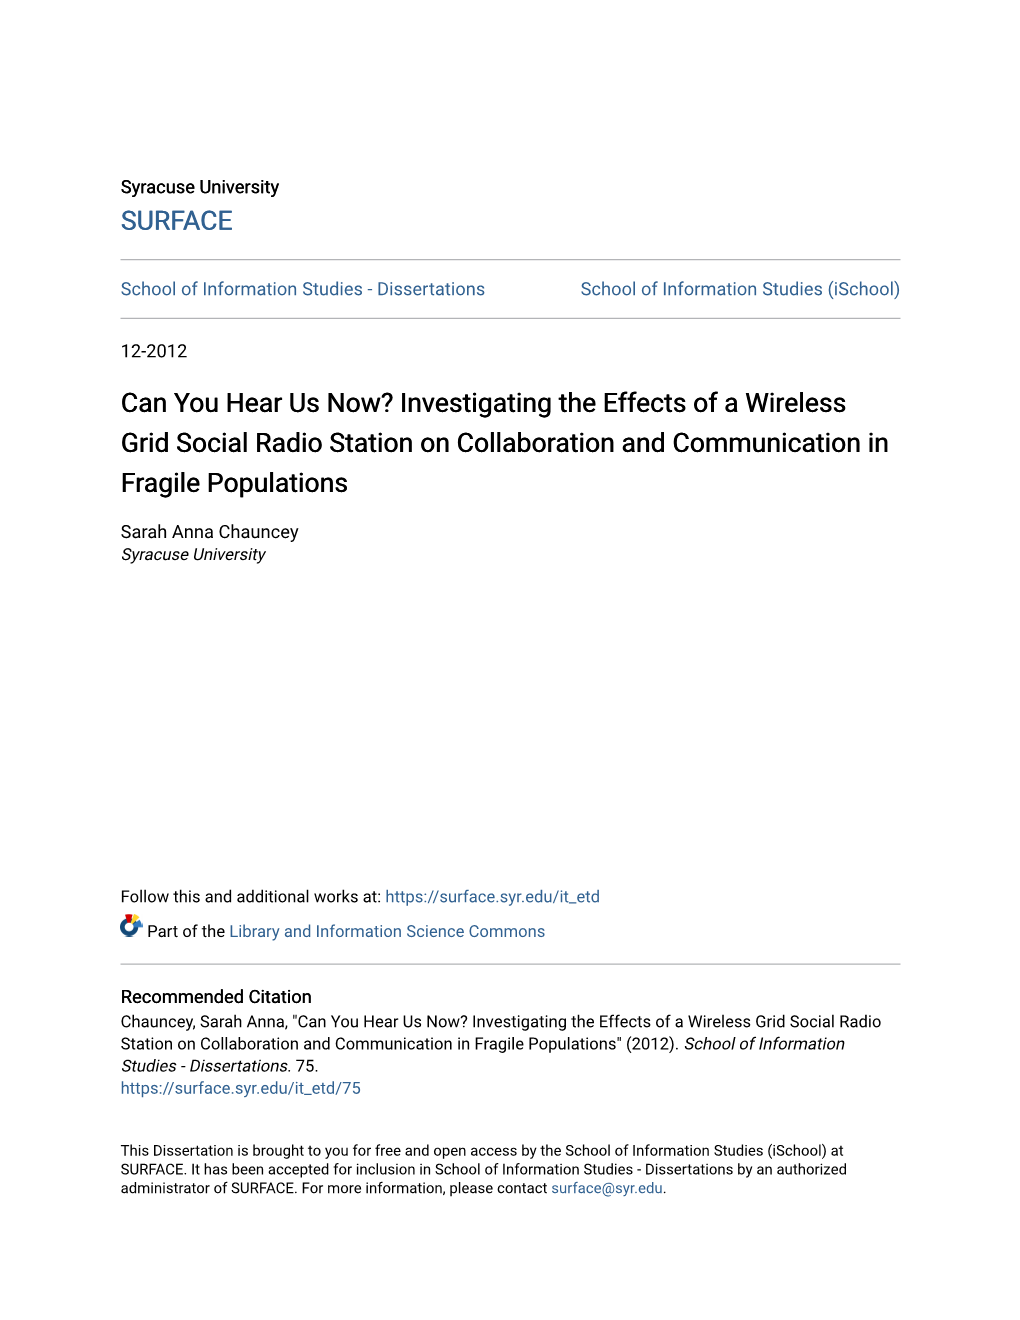 Investigating the Effects of a Wireless Grid Social Radio Station on Collaboration and Communication in Fragile Populations